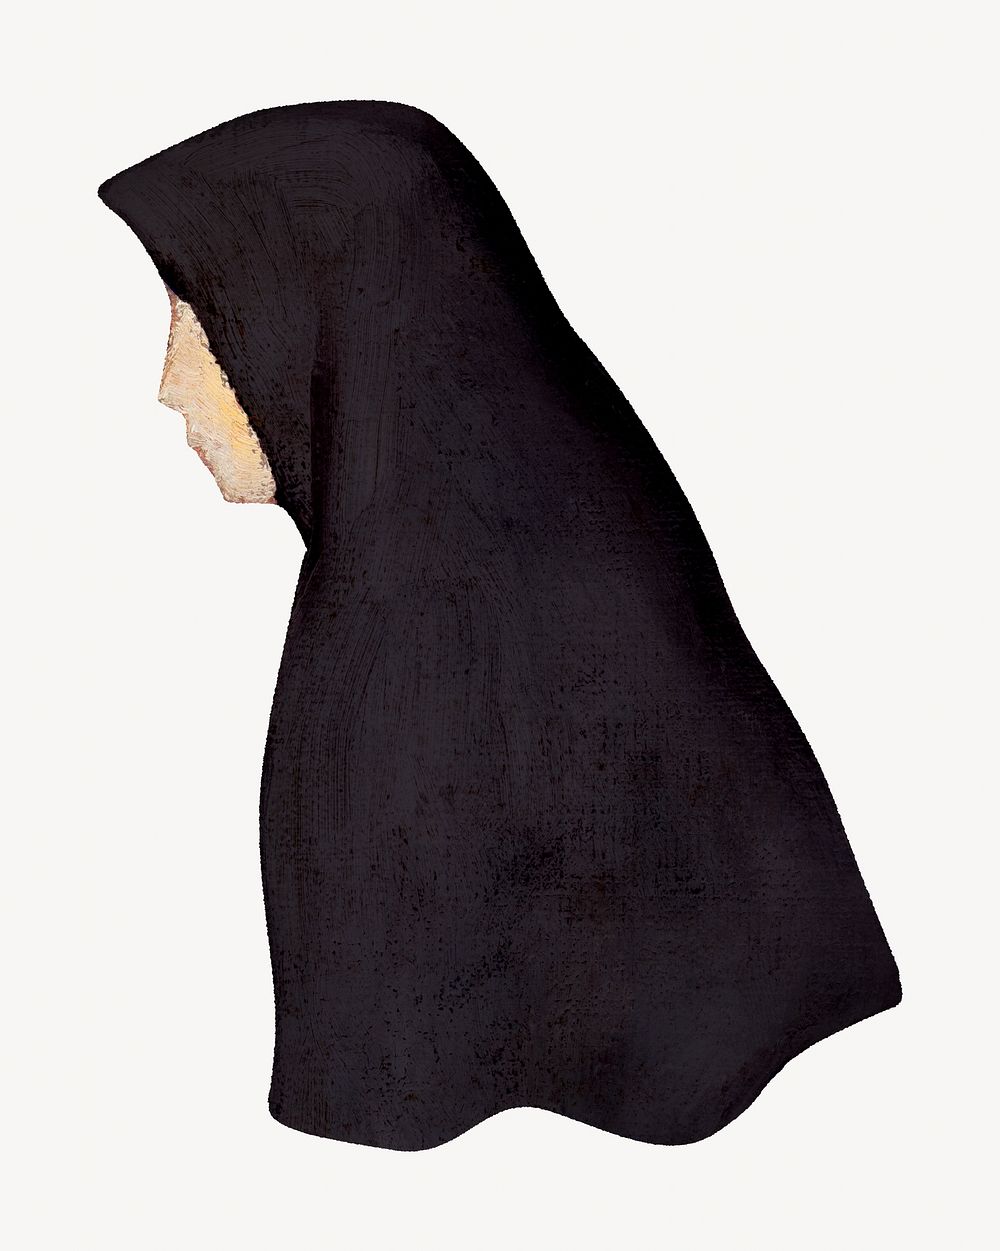 Vintage nun illustration  by Zolo Palugyay. Remixed by rawpixel.